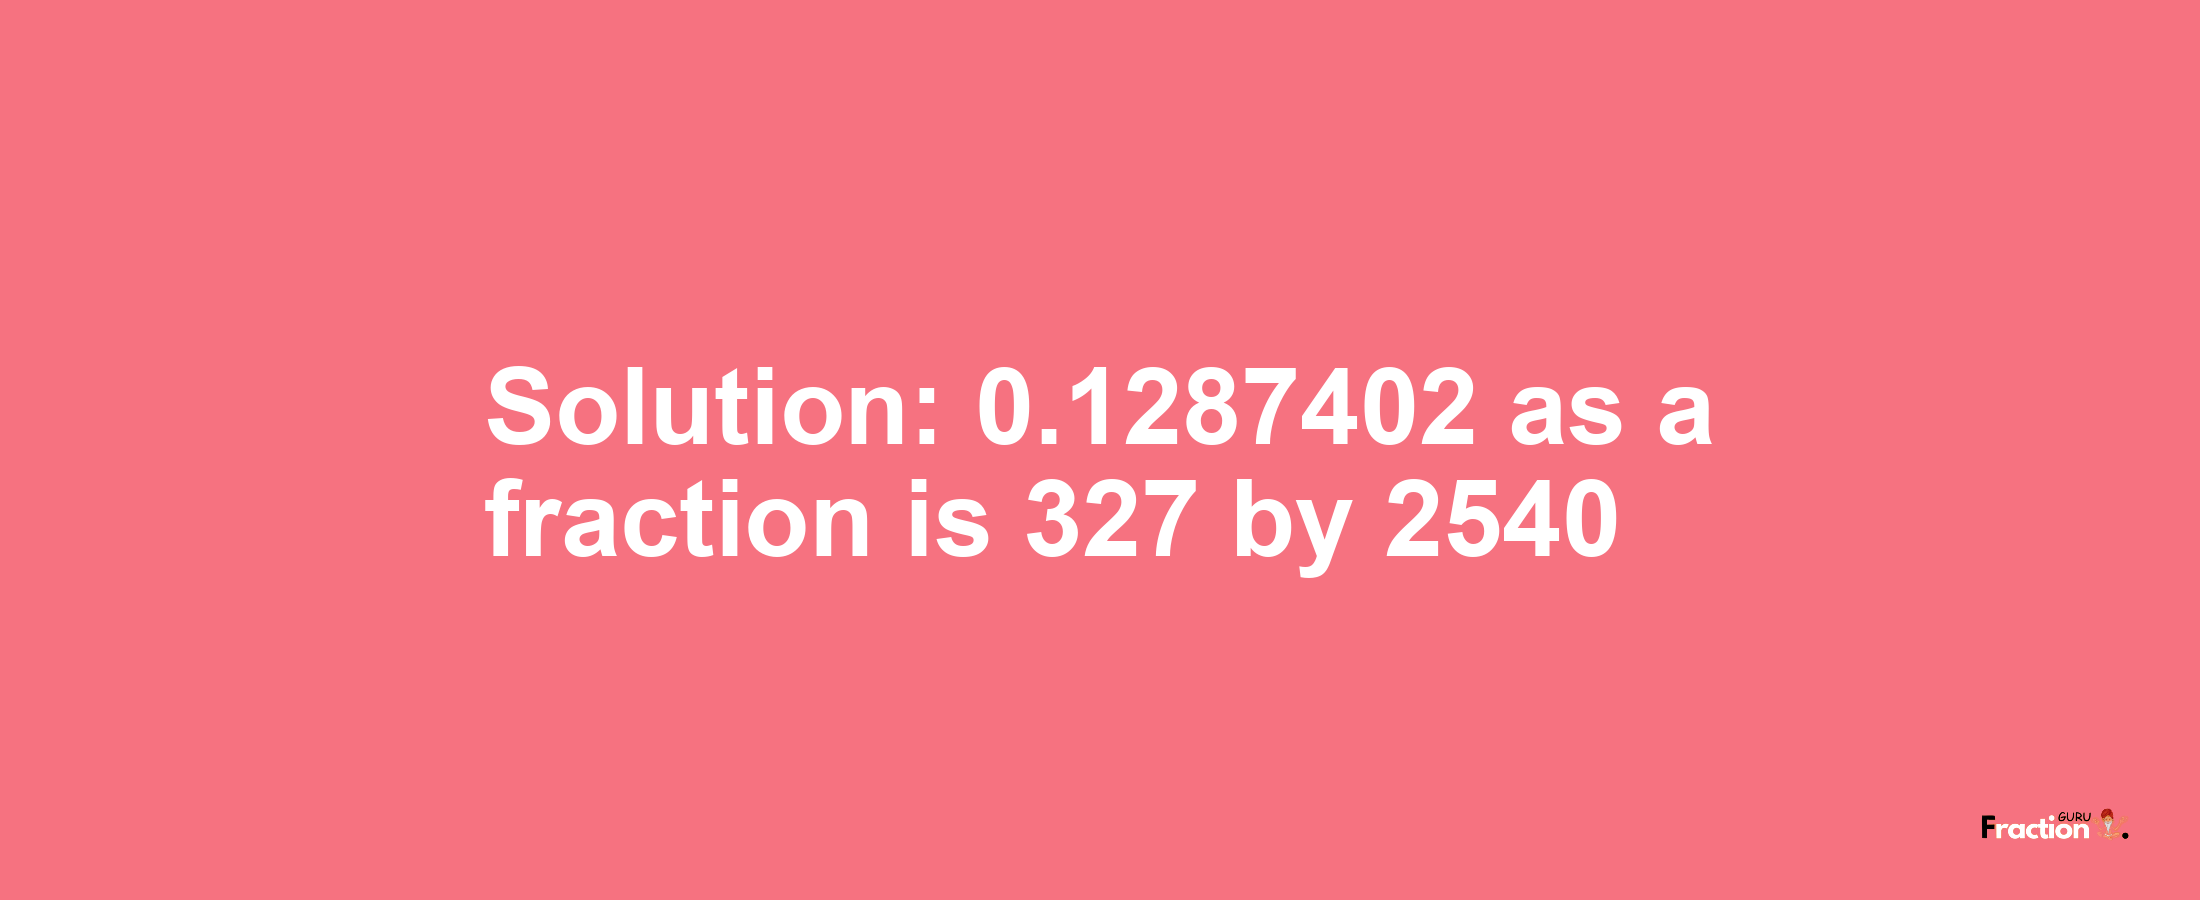 Solution:0.1287402 as a fraction is 327/2540